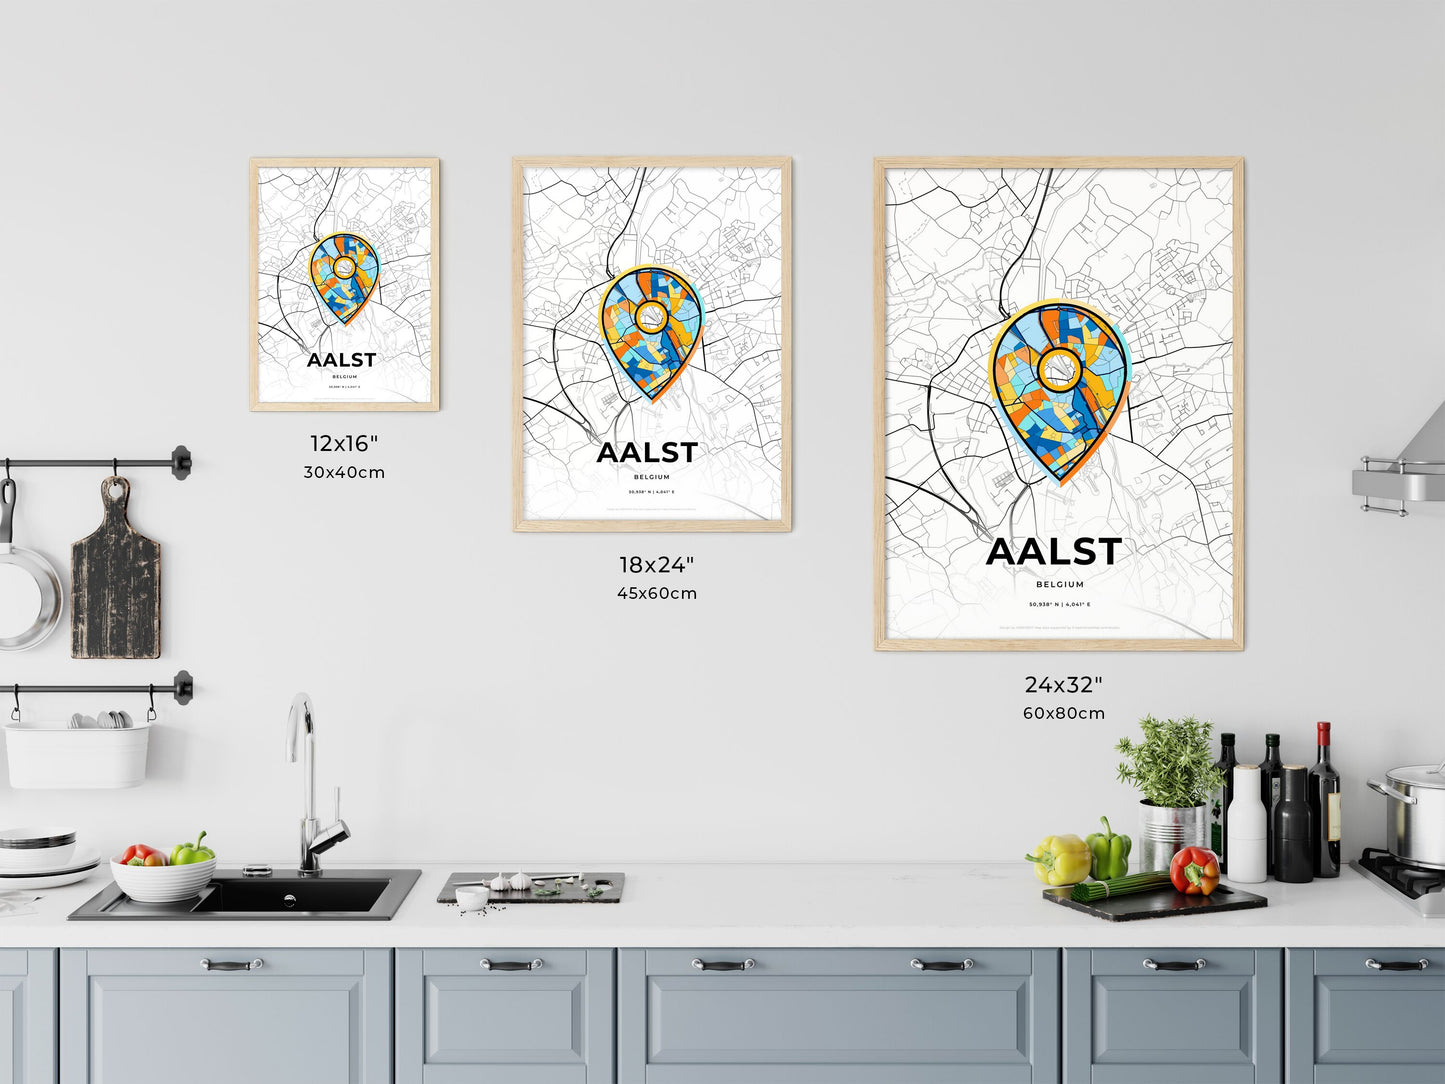 AALST BELGIUM minimal art map with a colorful icon. Where it all began, Couple map gift.